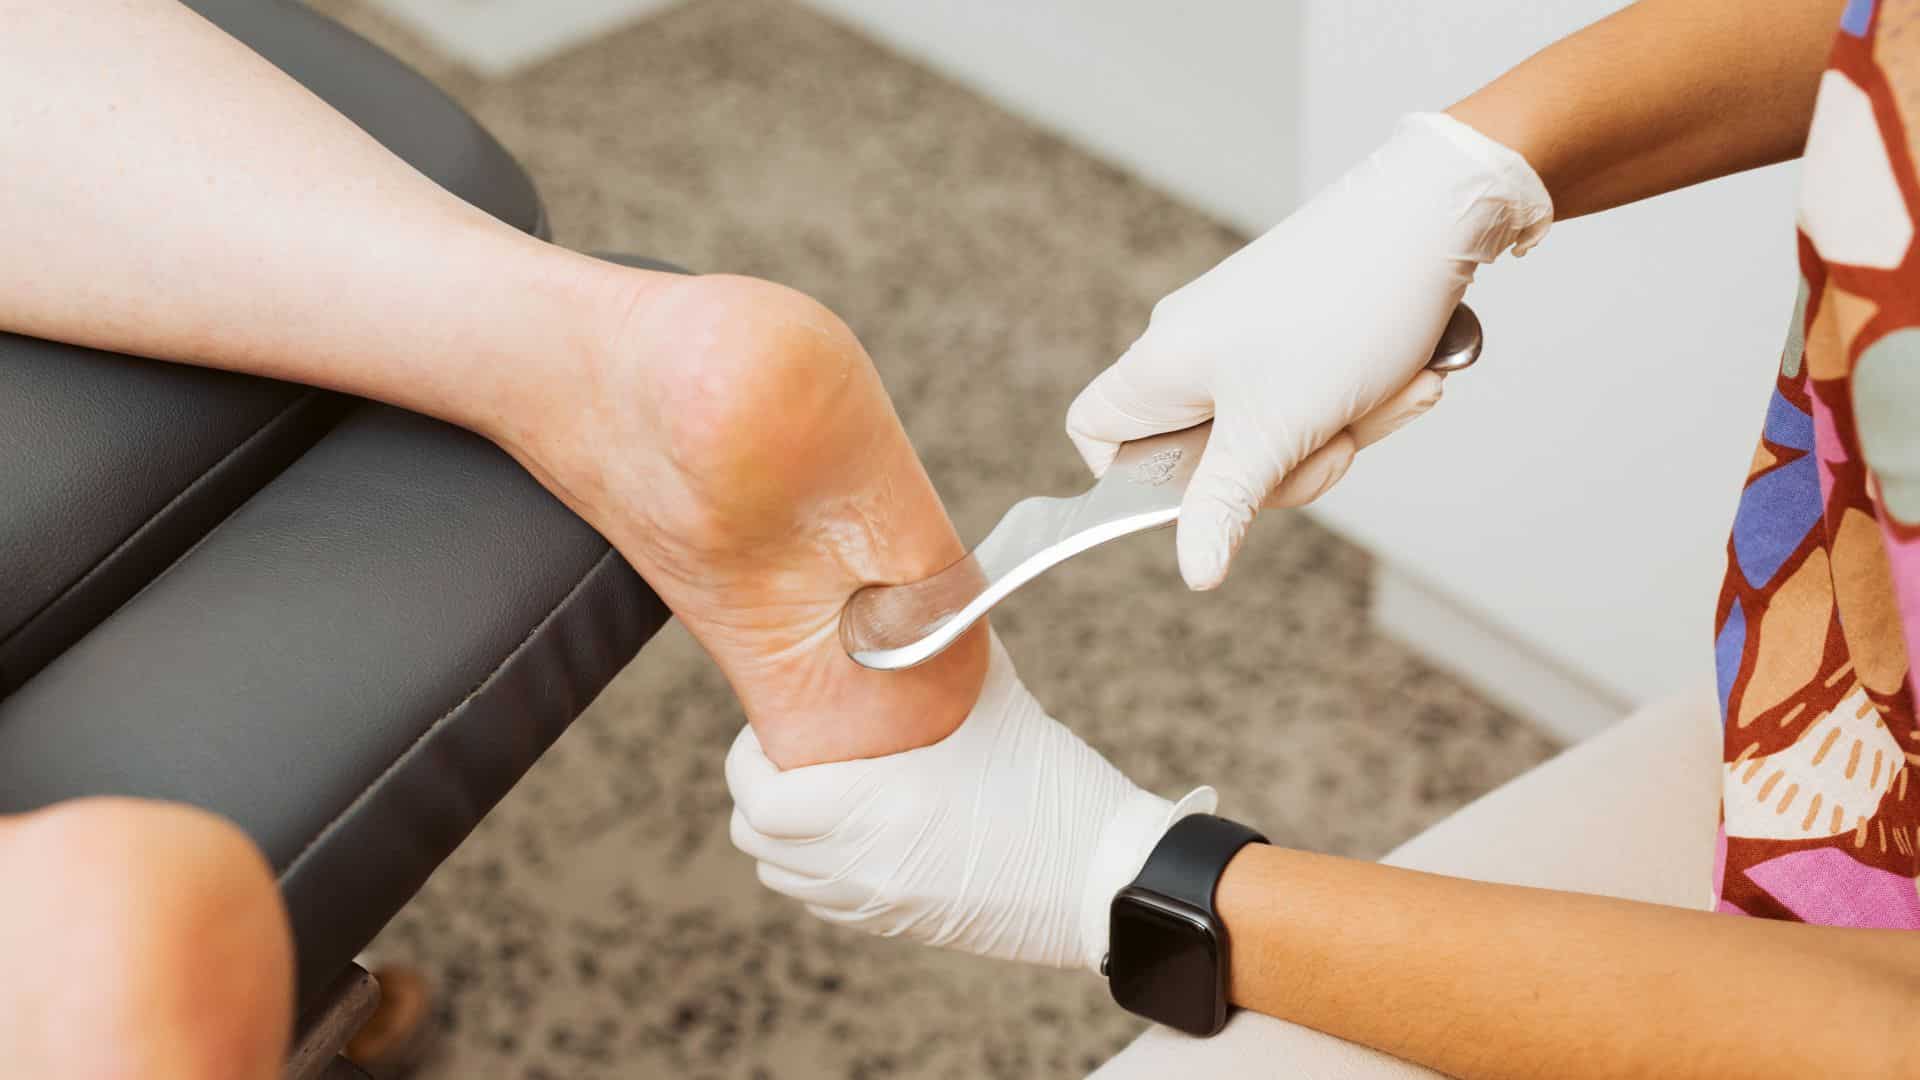 Tool-Assisted-Well-Heeled-Podiatry